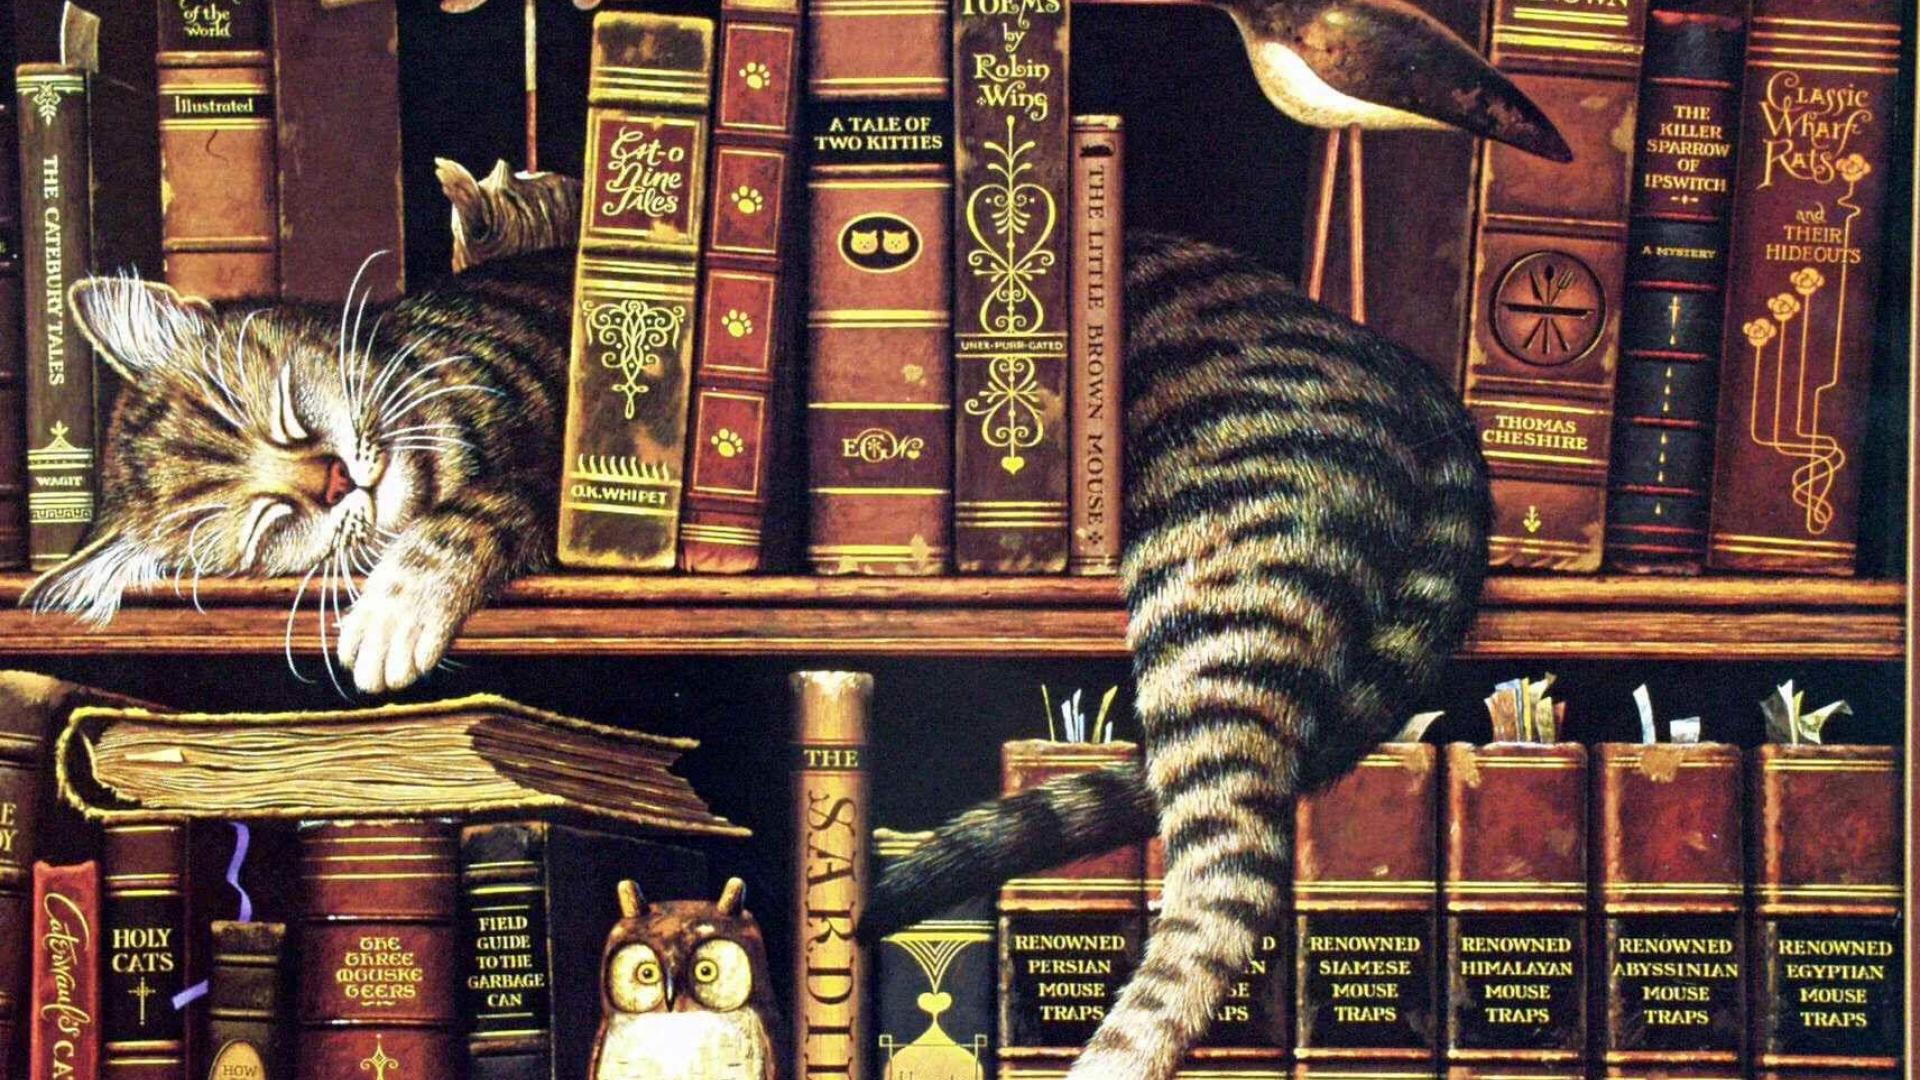 Drawing of a striped cat sleeping around books on a bookshelf, book titles are cat-themed twists on classics